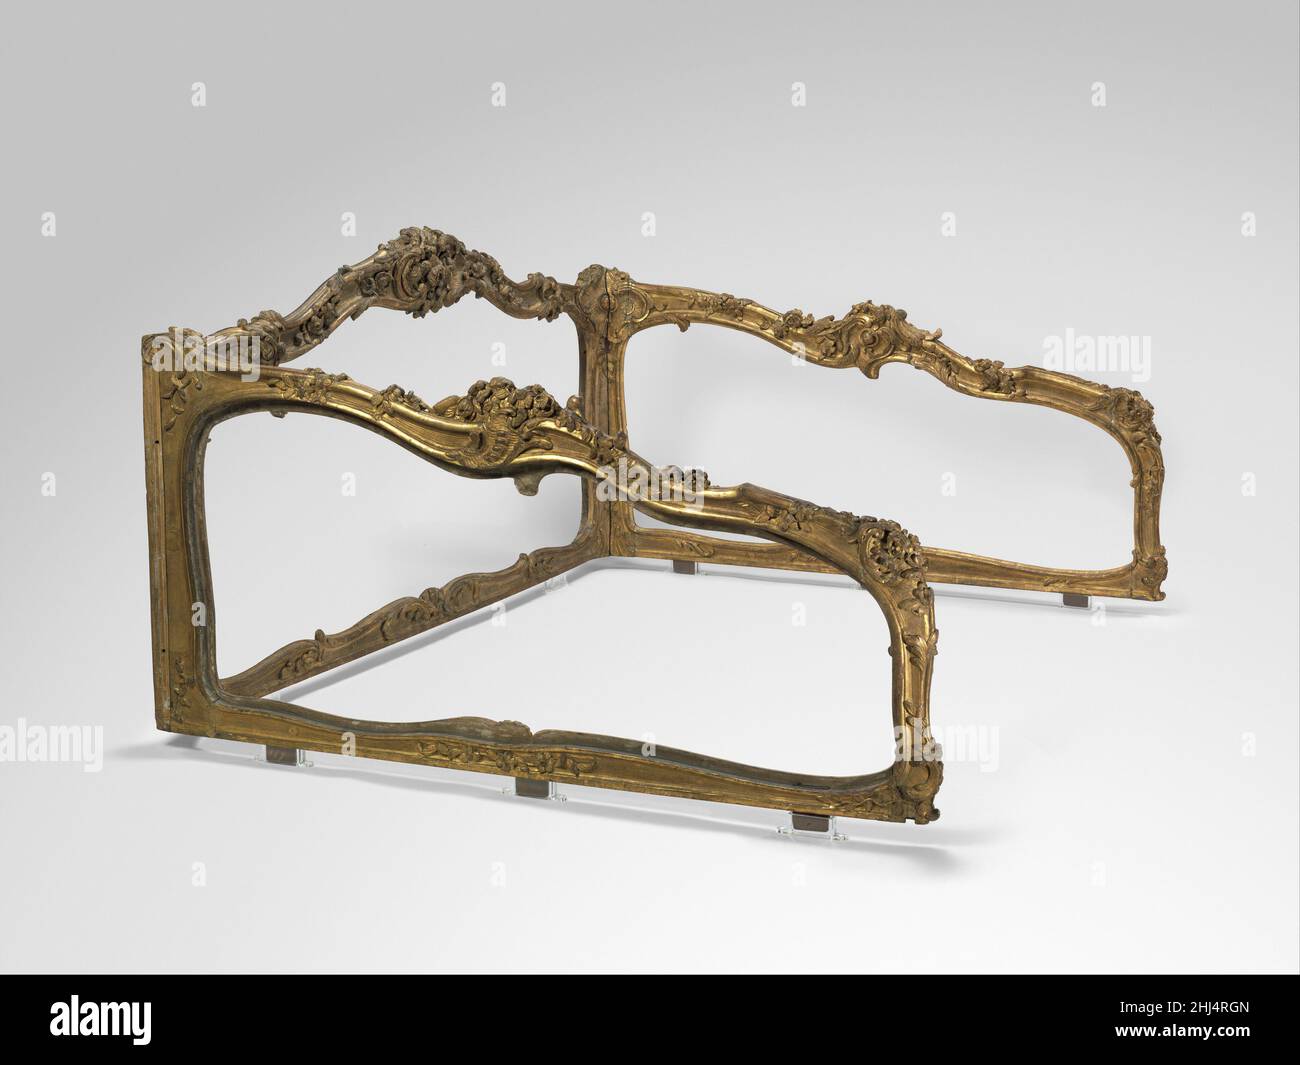 Frame for a daybed (Lit de repos) ca. 1740-45 French This elaborately carved three-part frame was originally part of a daybed or a sofa. Although not signed, the curving outline of the frame is enriched with heart-shaped cartouches, rocaille motifs and floral ornament that bear resemblance to the work of the menuisiers or joiners Jean-Baptiste Tilliard and Nicolas-Quinibert Foliot. Normally invisible, the rectangular blocks underneath the frame are the tenons which would have fitted in similar size openings, the mortises, to join the frame to the lower part of the bed or sofa. Although incompl Stock Photo